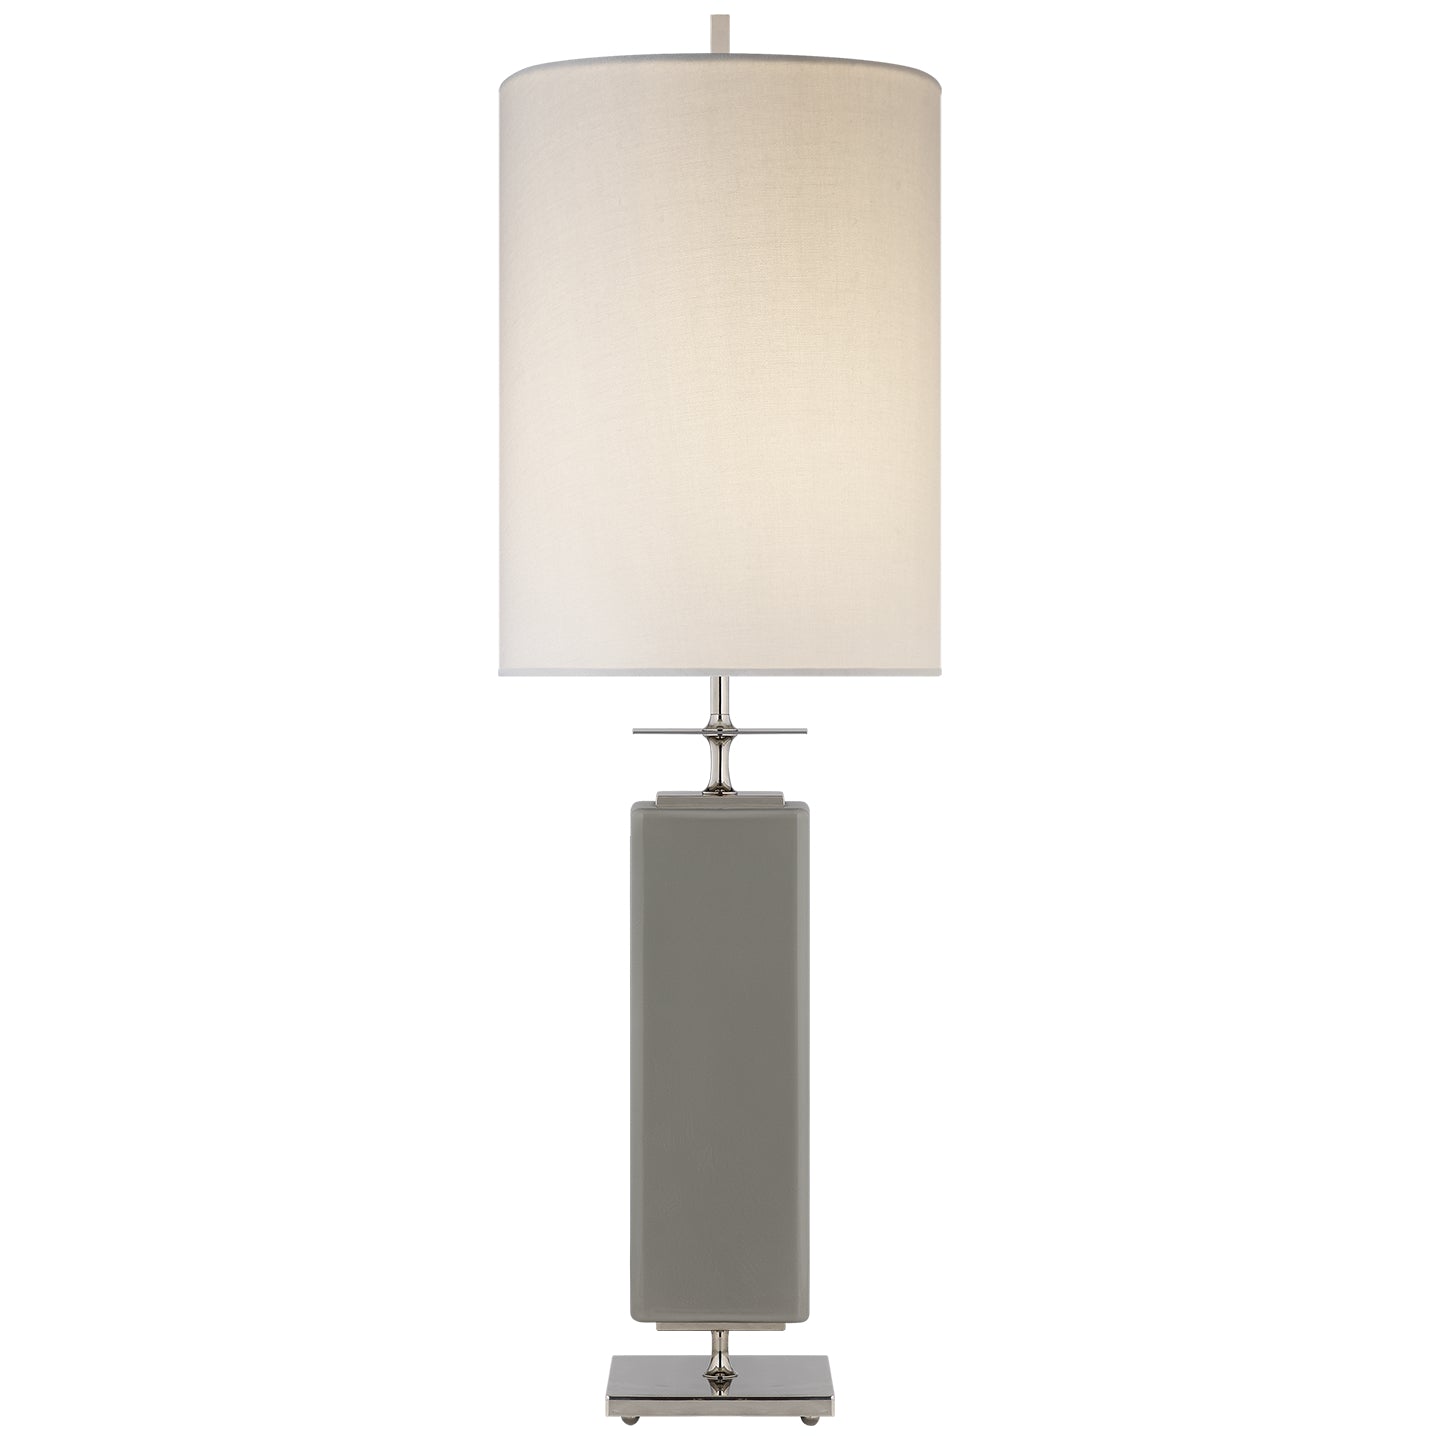 Load image into Gallery viewer, Visual Comfort Signature - KS 3044GRY-L - One Light Table Lamp - Beekman - Grey
